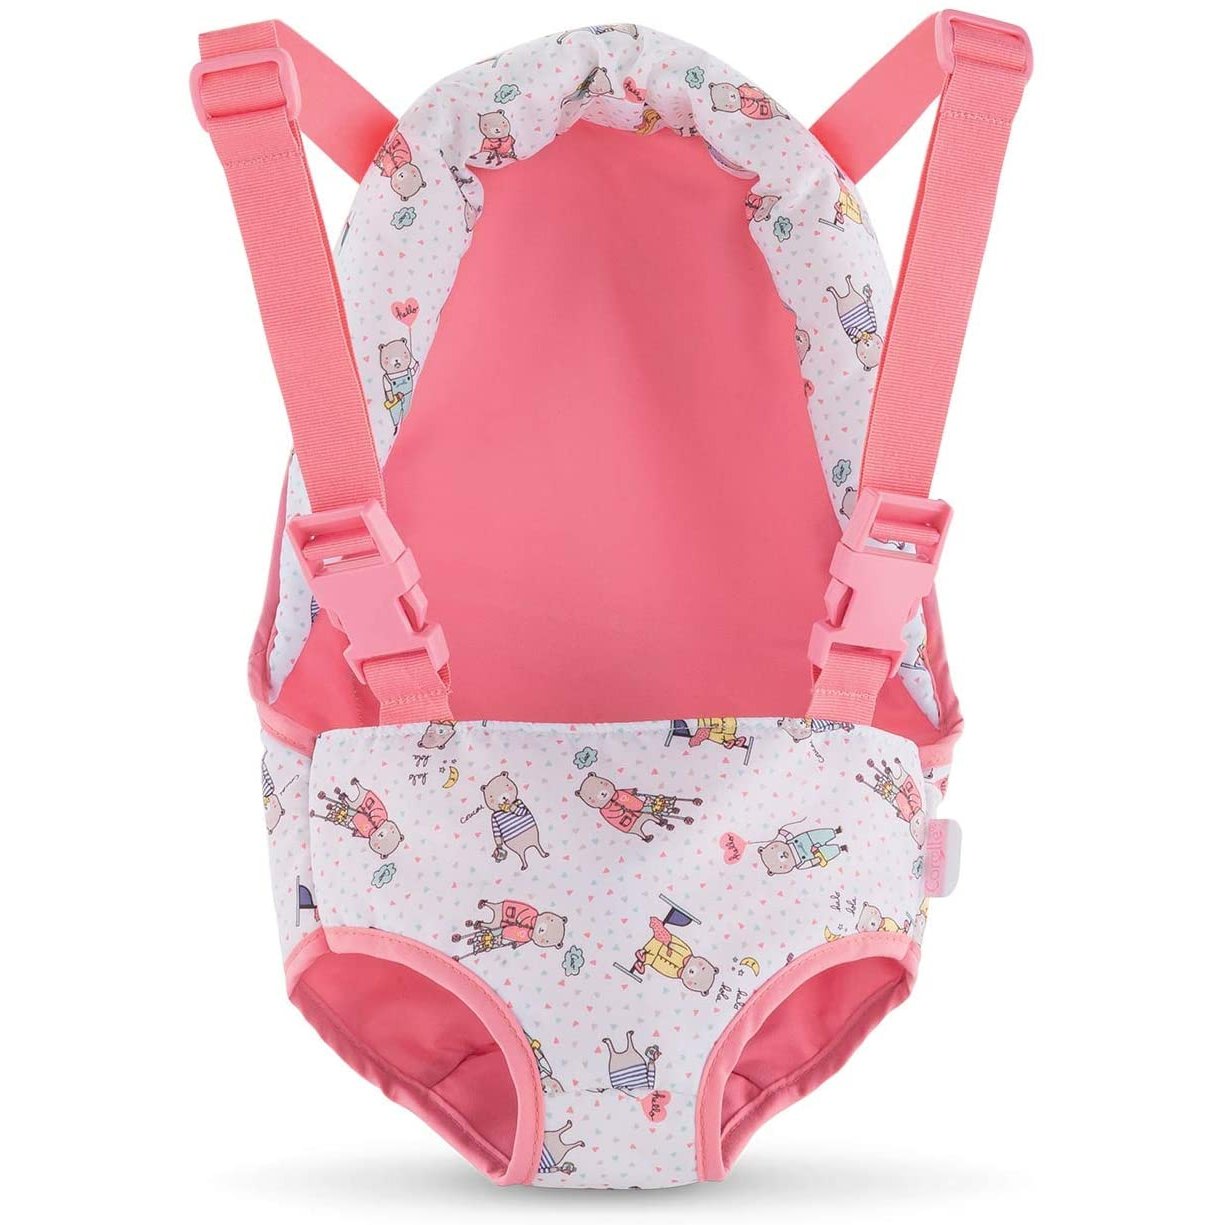 Corolle Mon Grand Poupon Baby Doll Sling for 14" & 17" Dolls - Pink/White-COROLLE-Little Giant Kidz